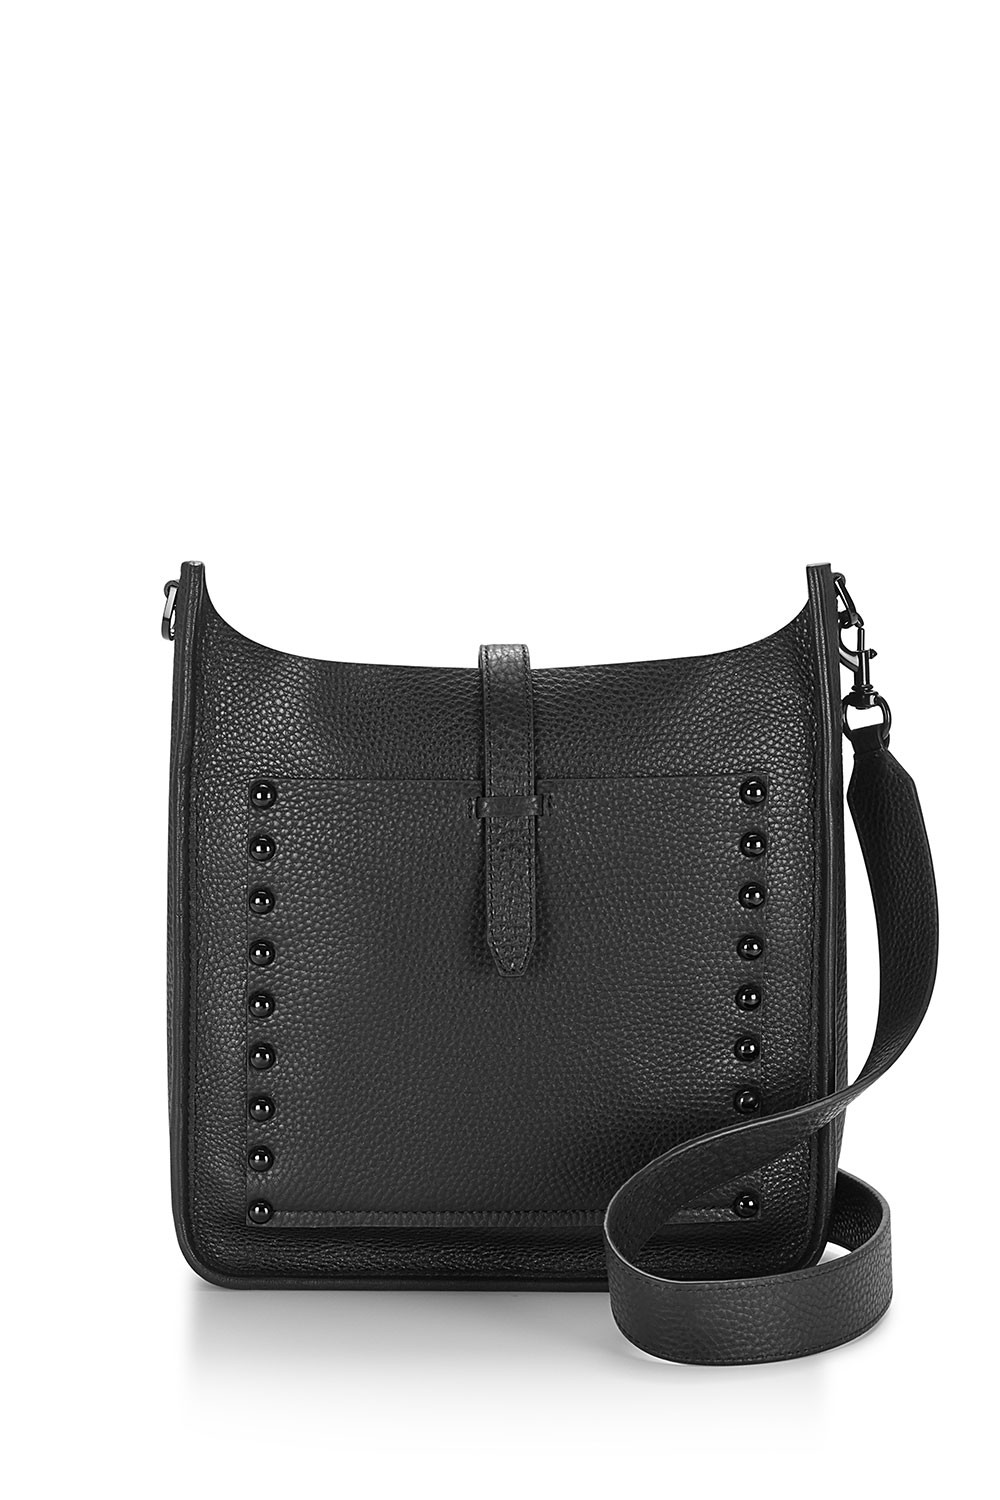 Choose Rebecca Minkoff Bags and be Trendy - StyleSkier.com